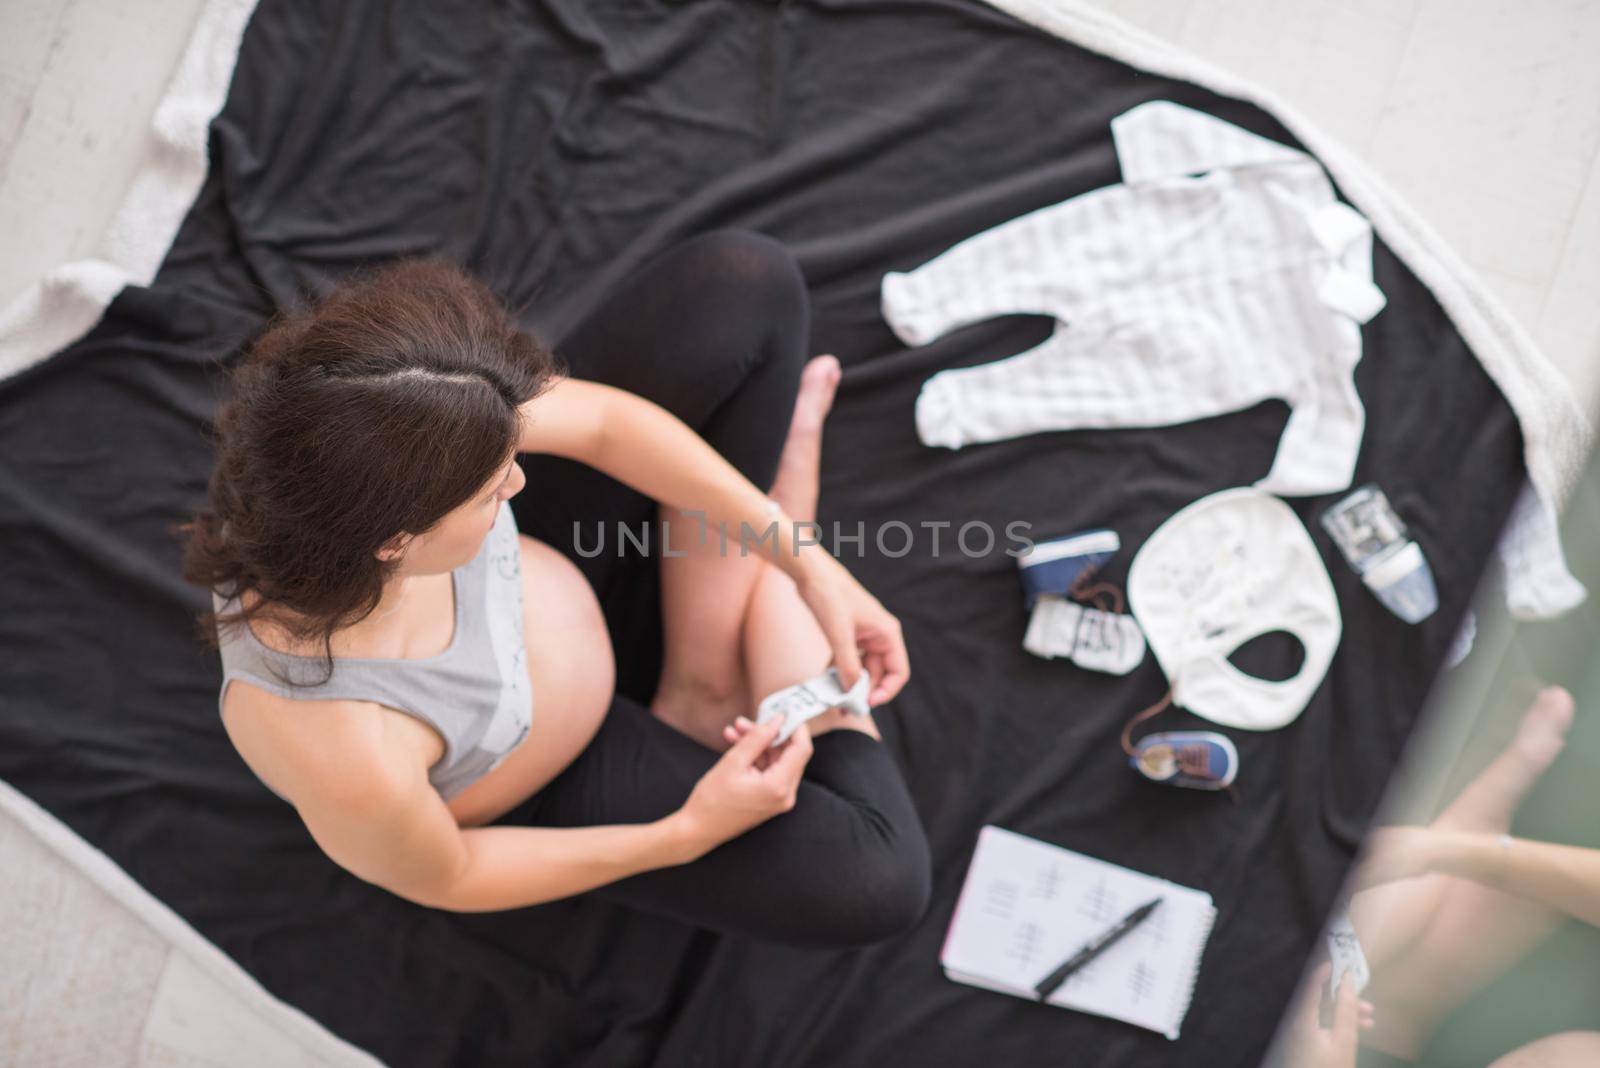 a pregnant woman at home on the floor checking list of baby clothes preparing for going to maternity hospital top view.Pregnancy, birth concept